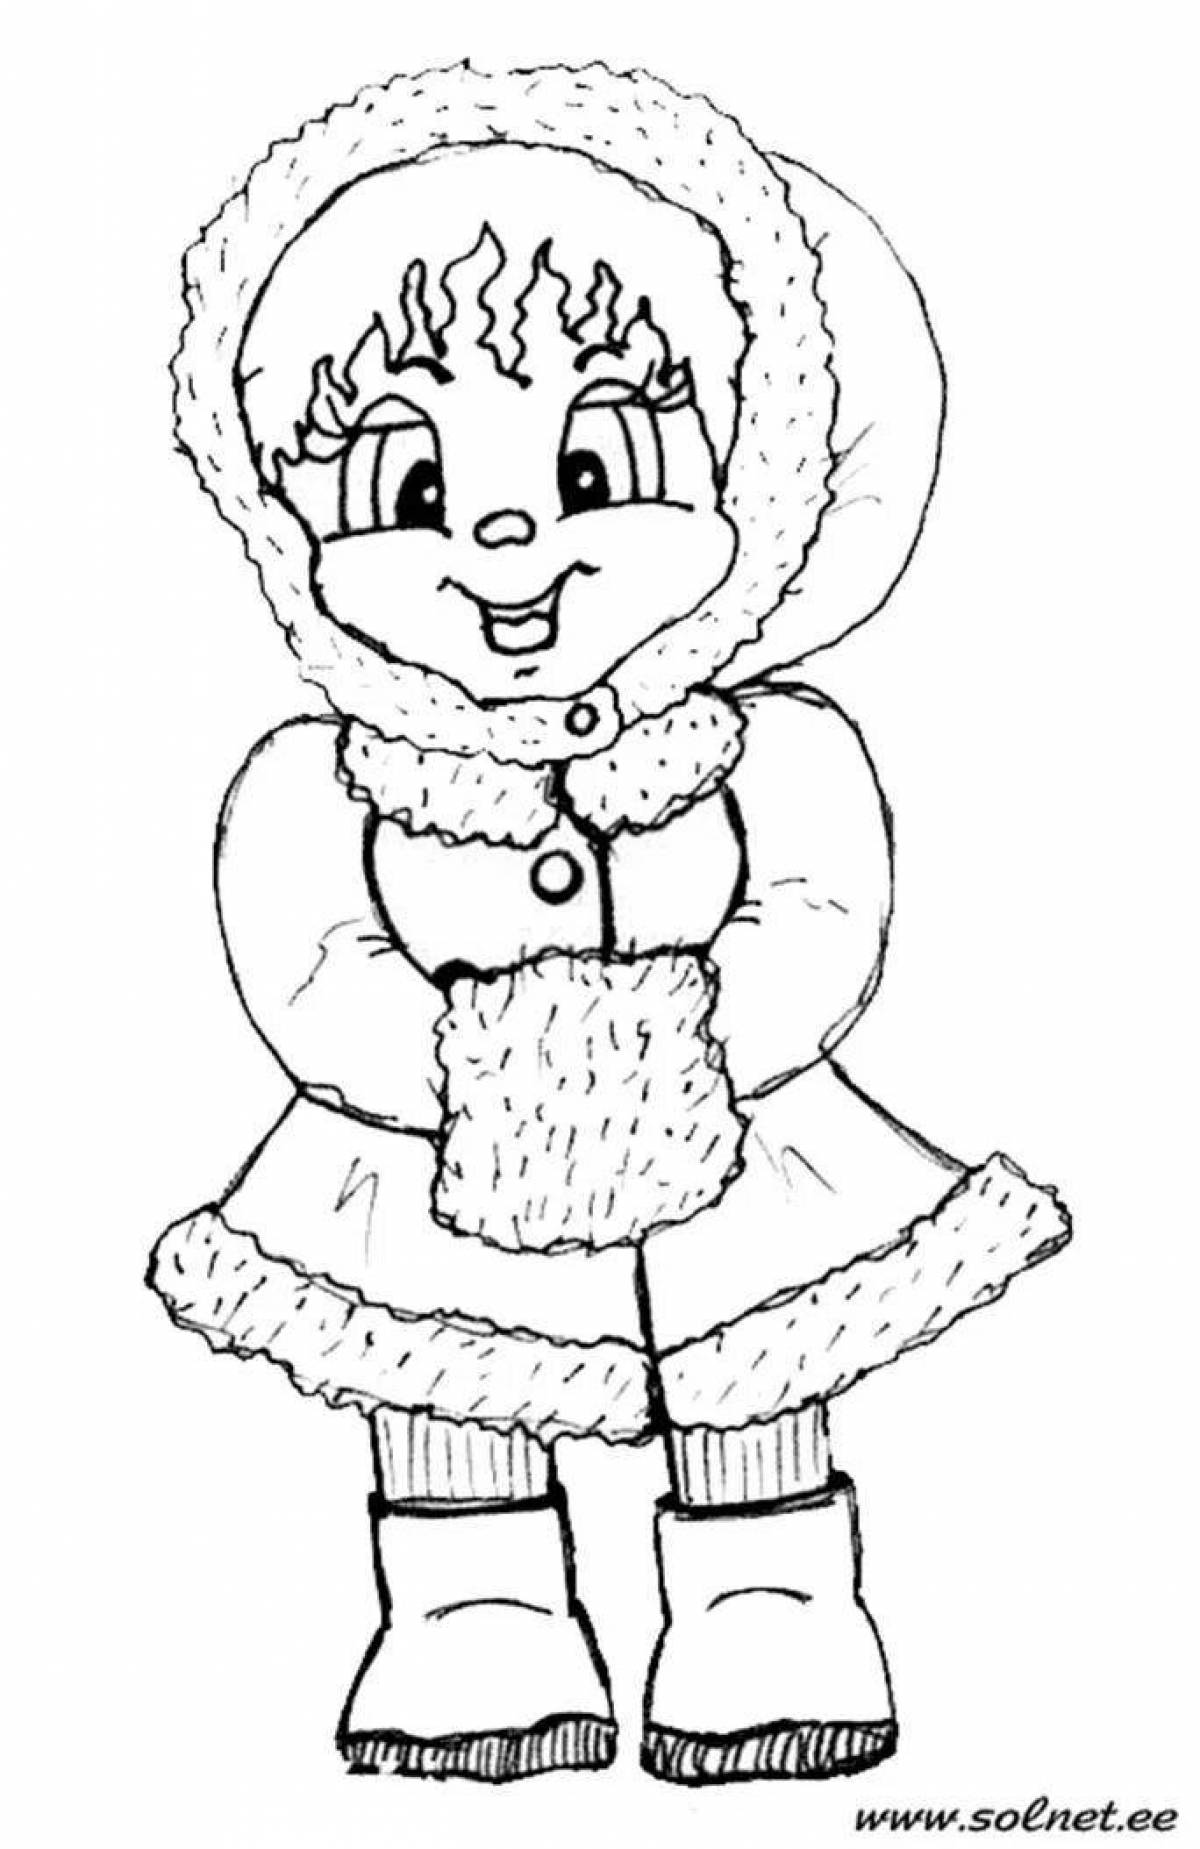 Naughty child in winter clothes